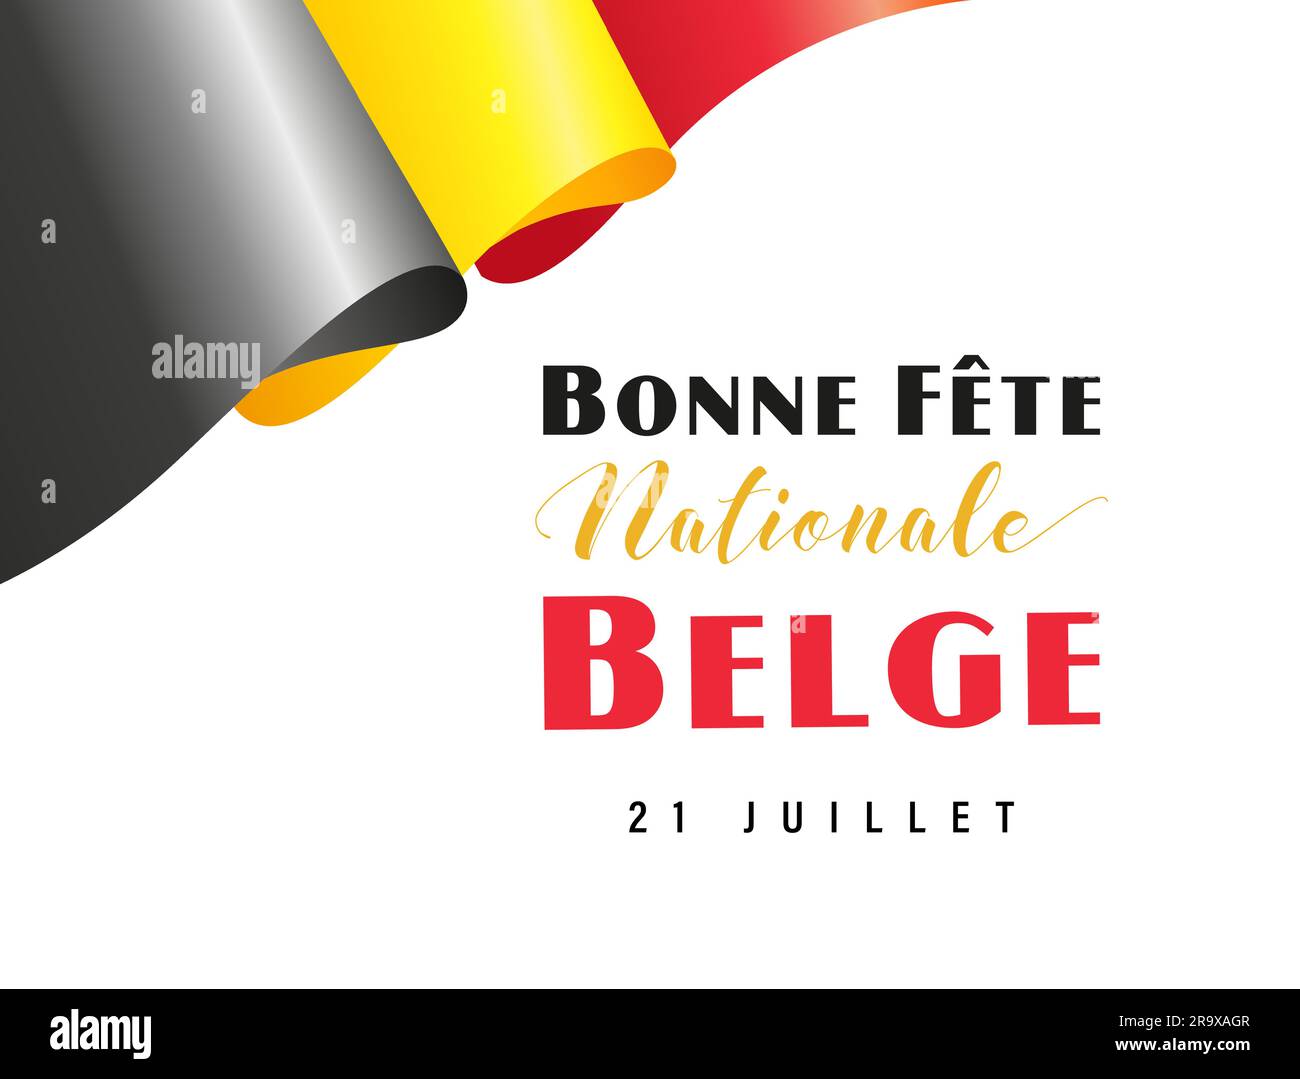 Greeting card design with French inscription Bonne Fete Nationale Belge - Happy National Day Belgium, July 21. Belgian flag background. Welcome to Bel Stock Vector